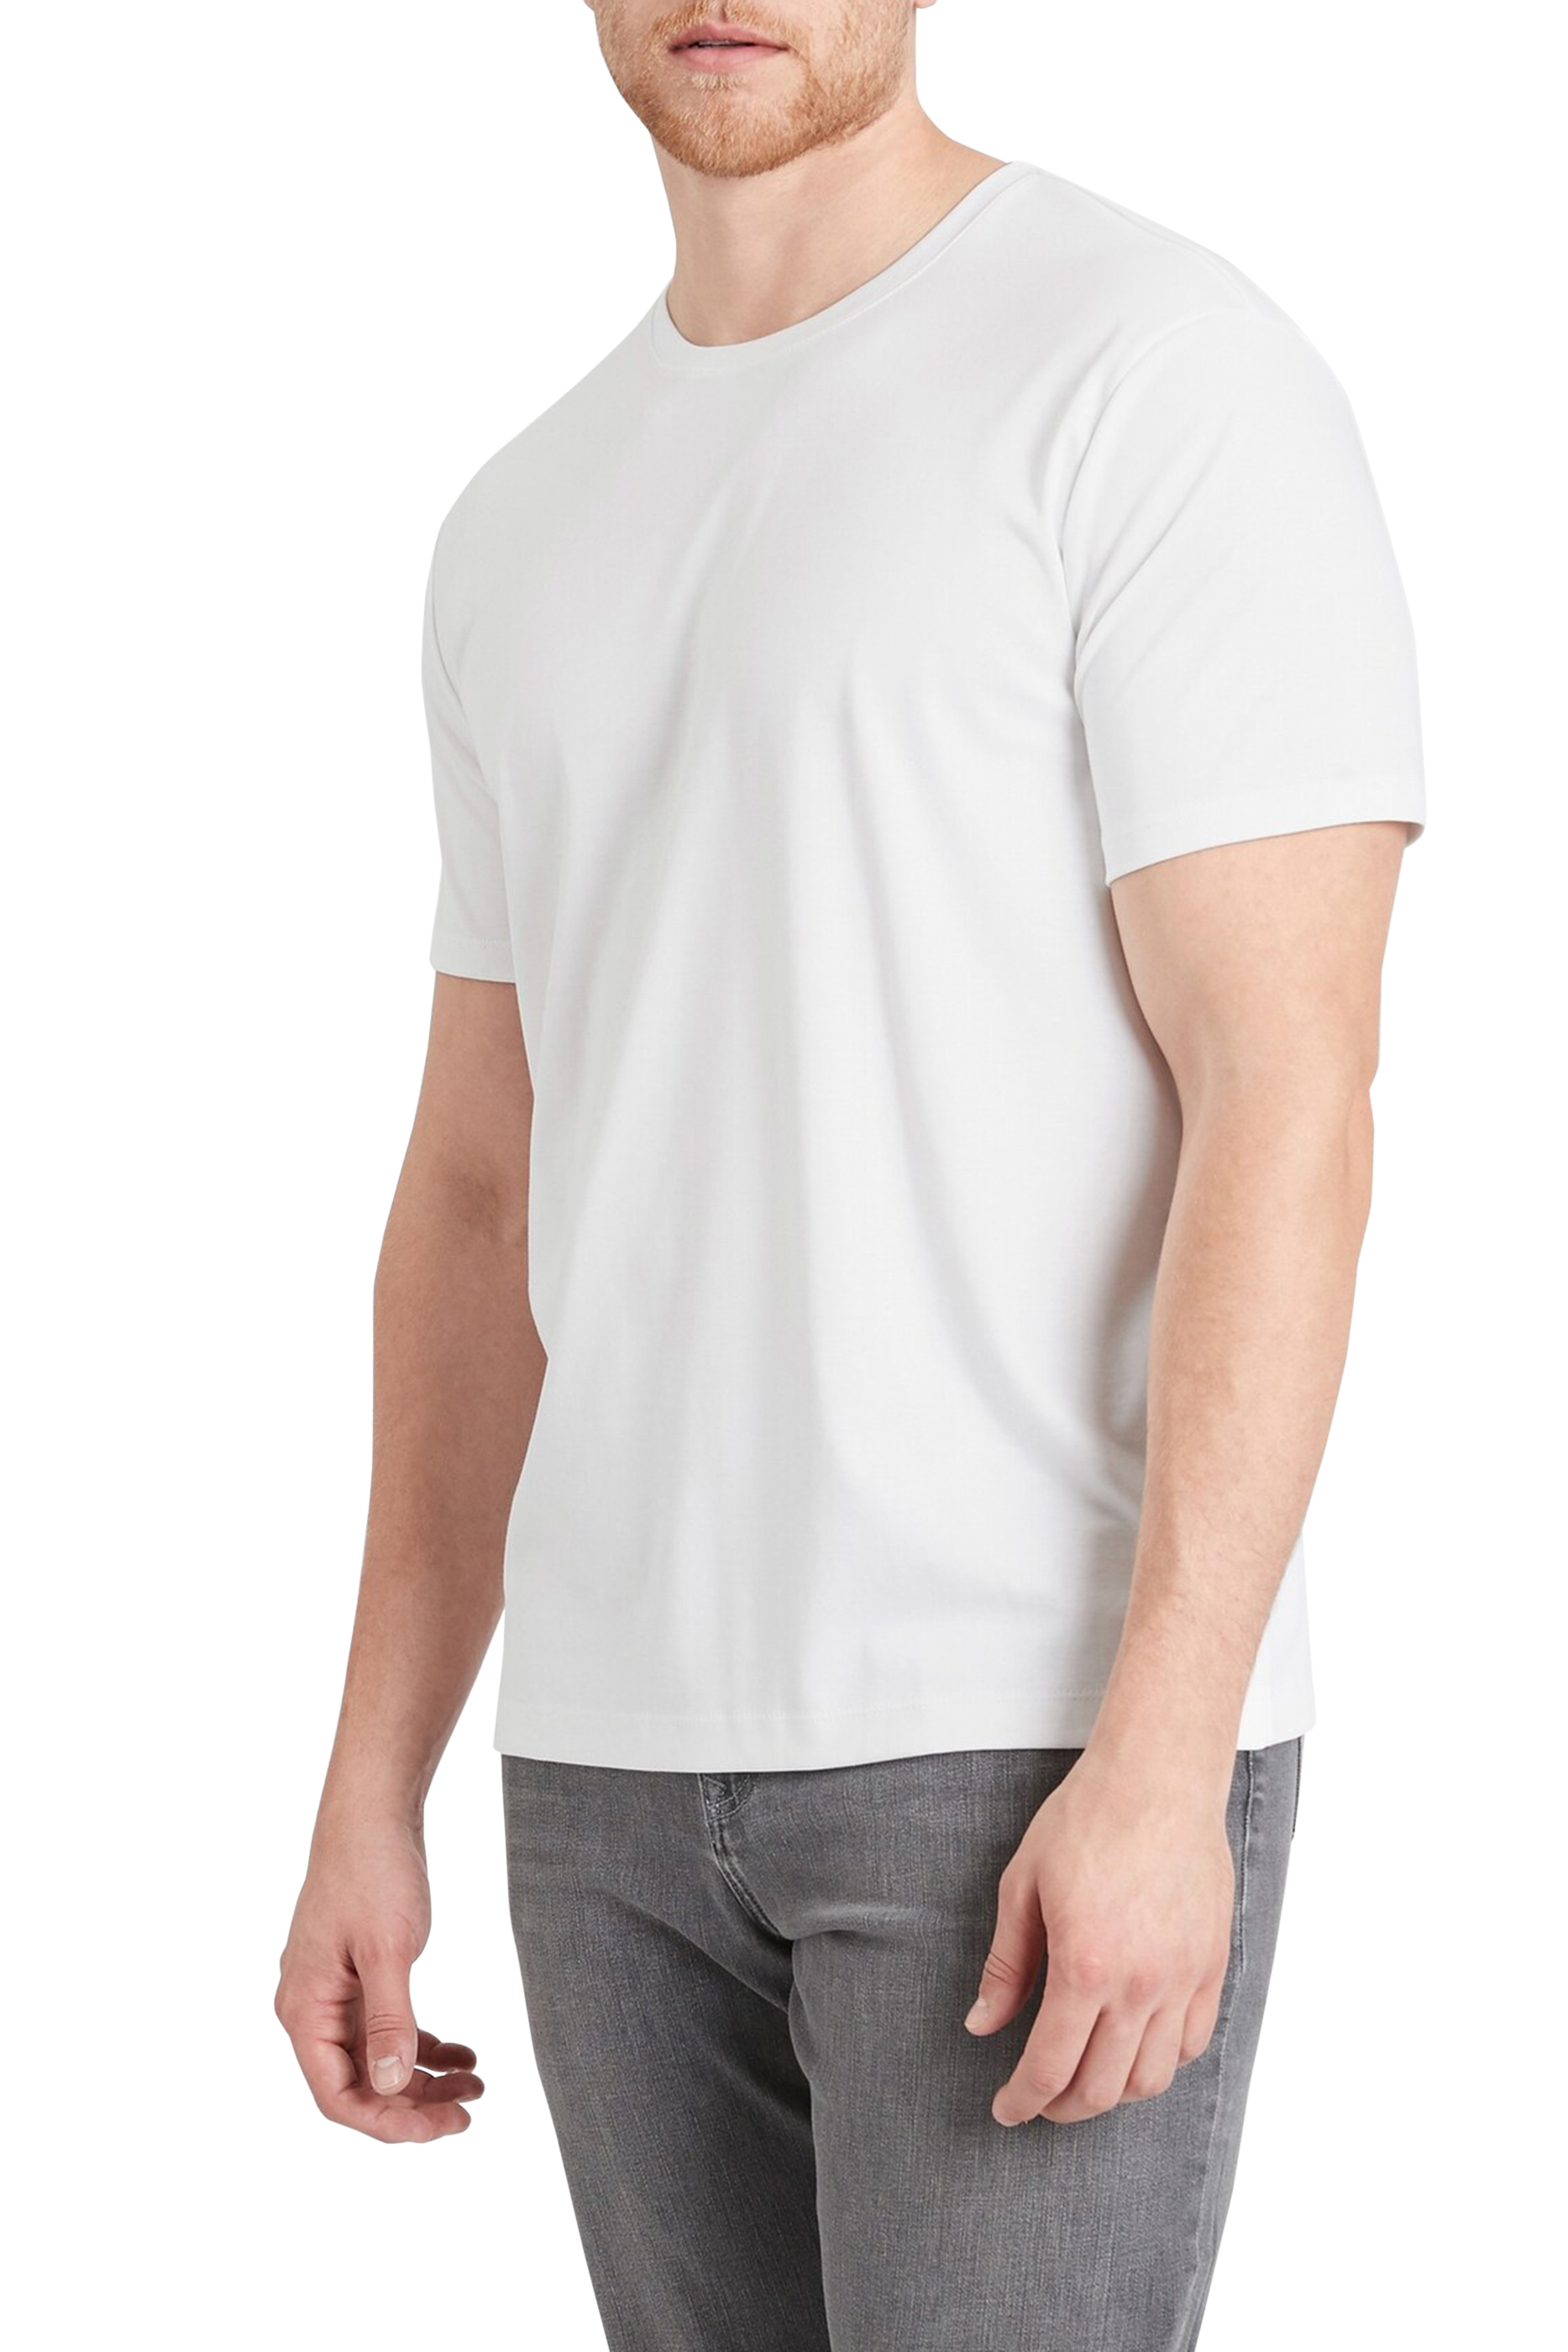 Buy Banana Republic Luxury-Touch Crew Neck T-Shirt for Mens ...